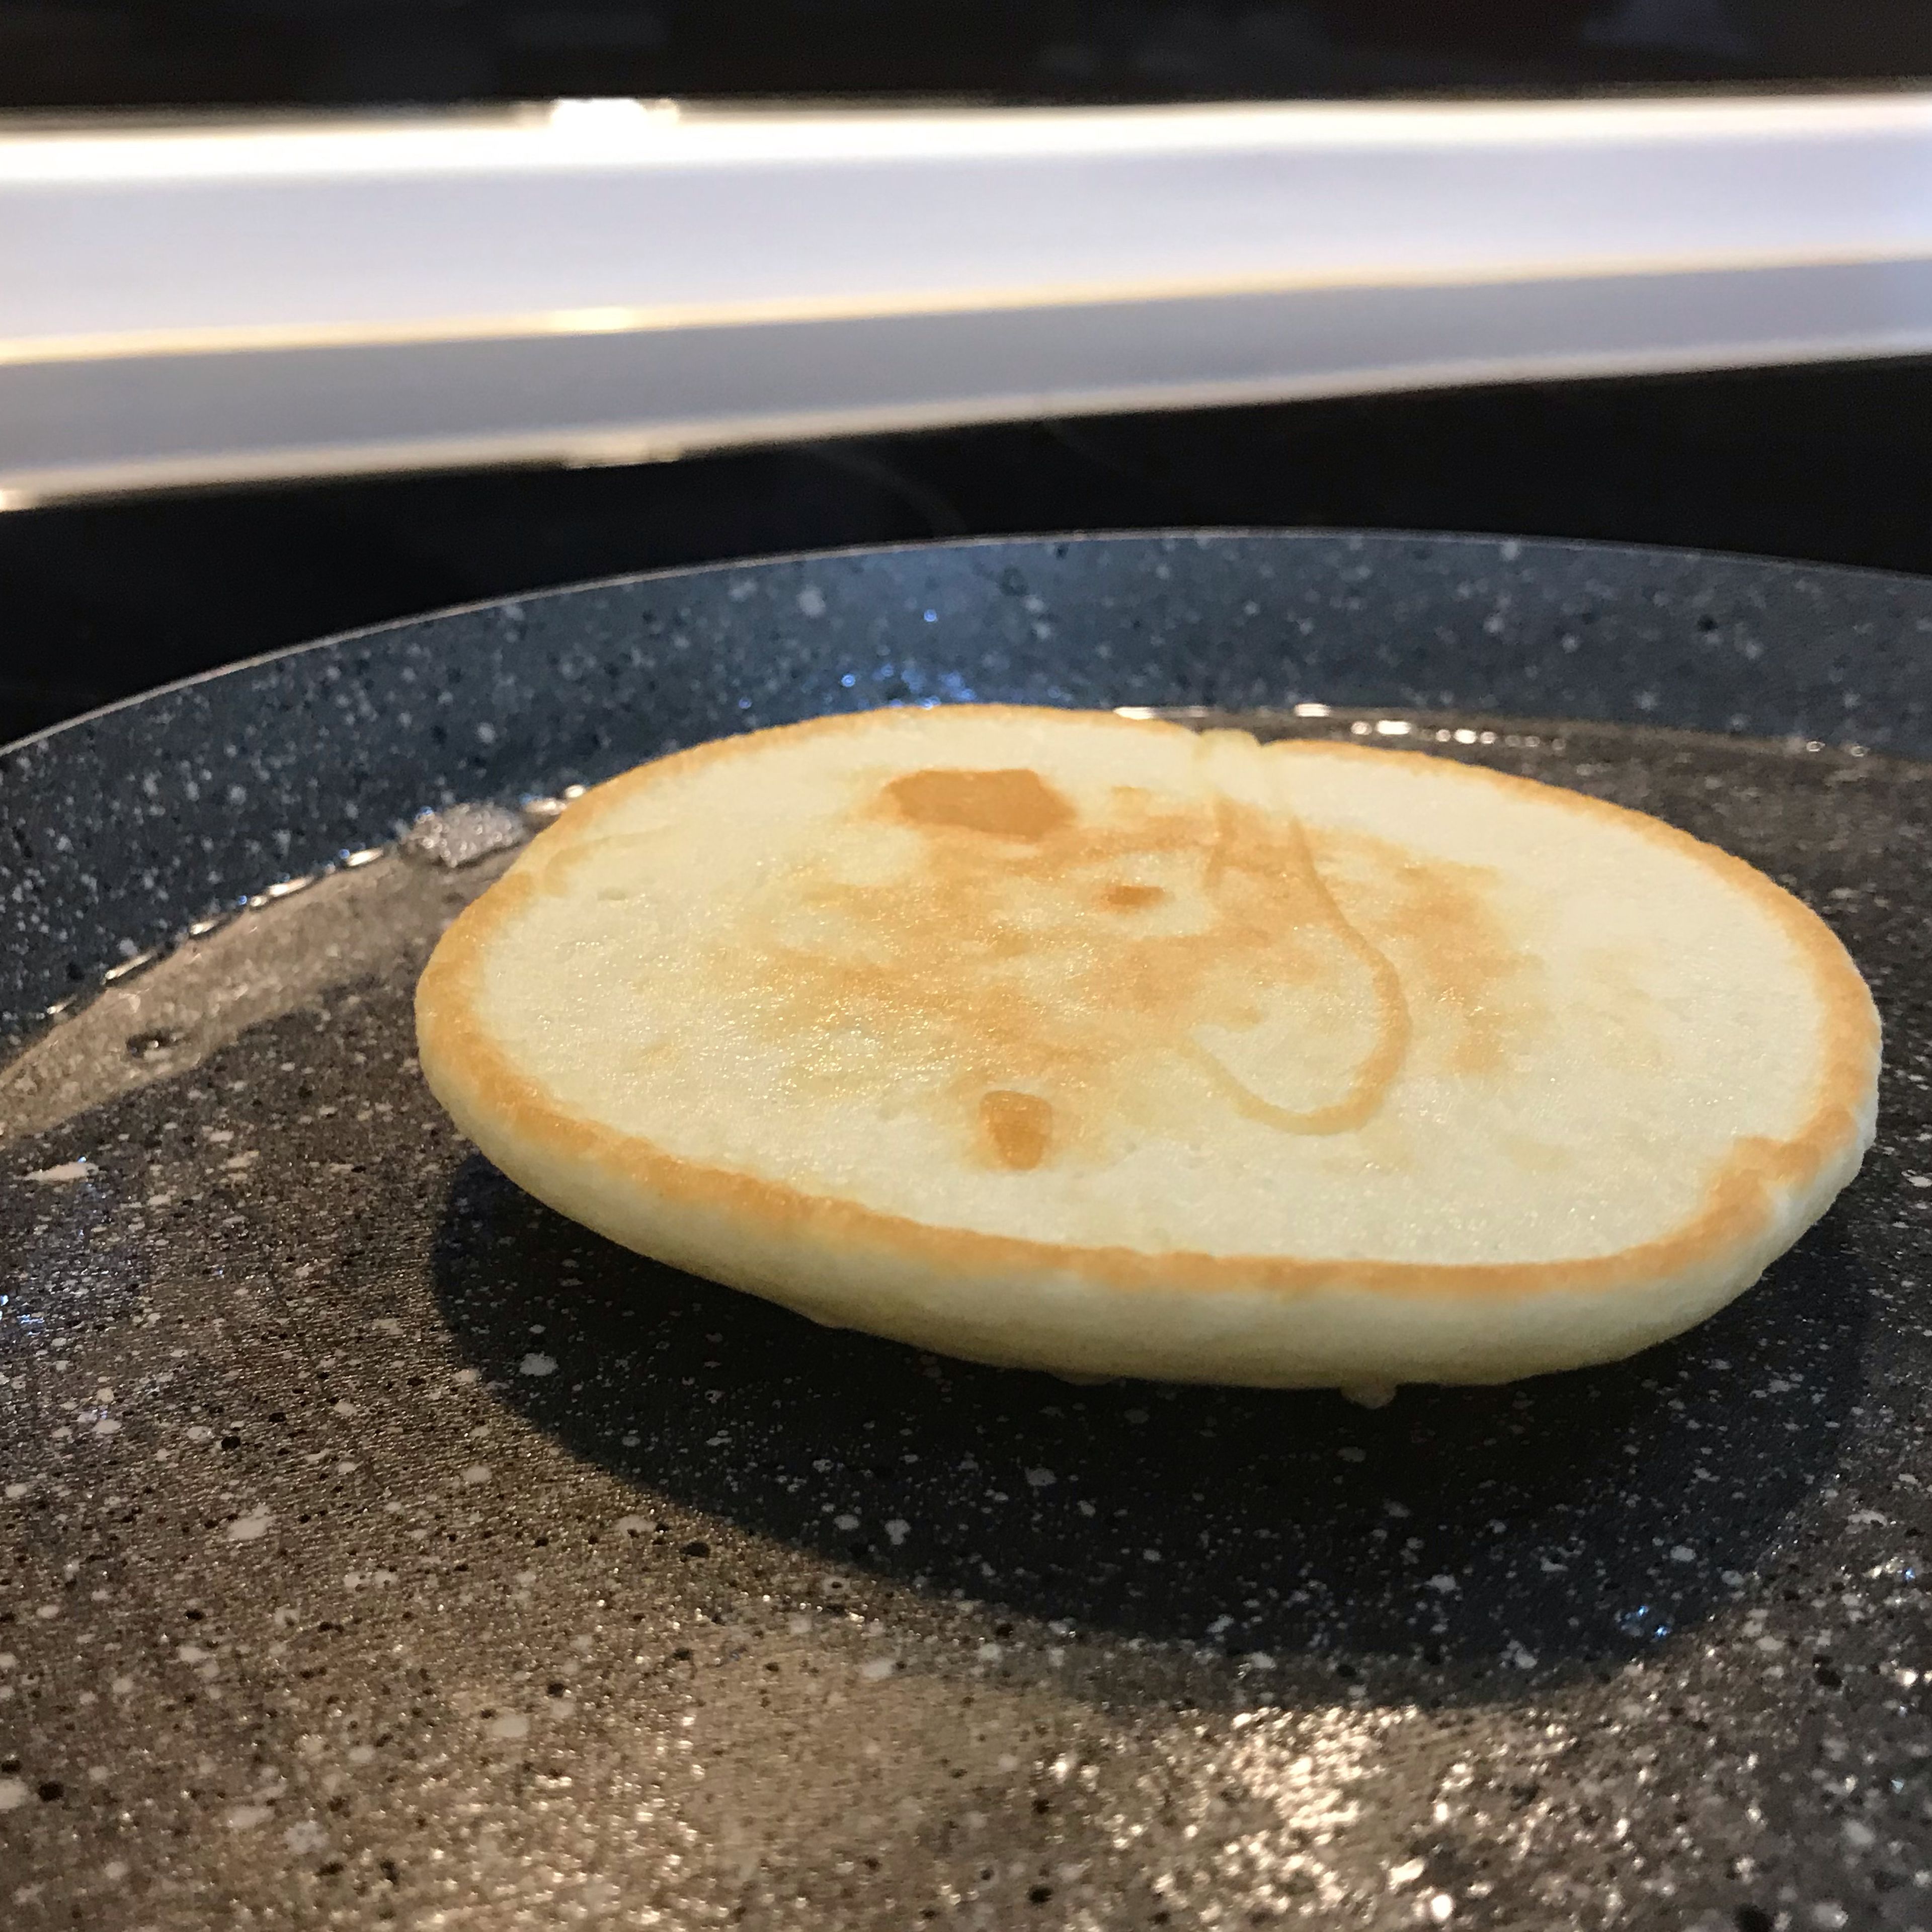 The pancakes should look like the picture at the end. You can put whatever you want, such as honey, jam or salty ingredients such as sour cream or cheese. As you can see the pancake is very fluffy and delicious!